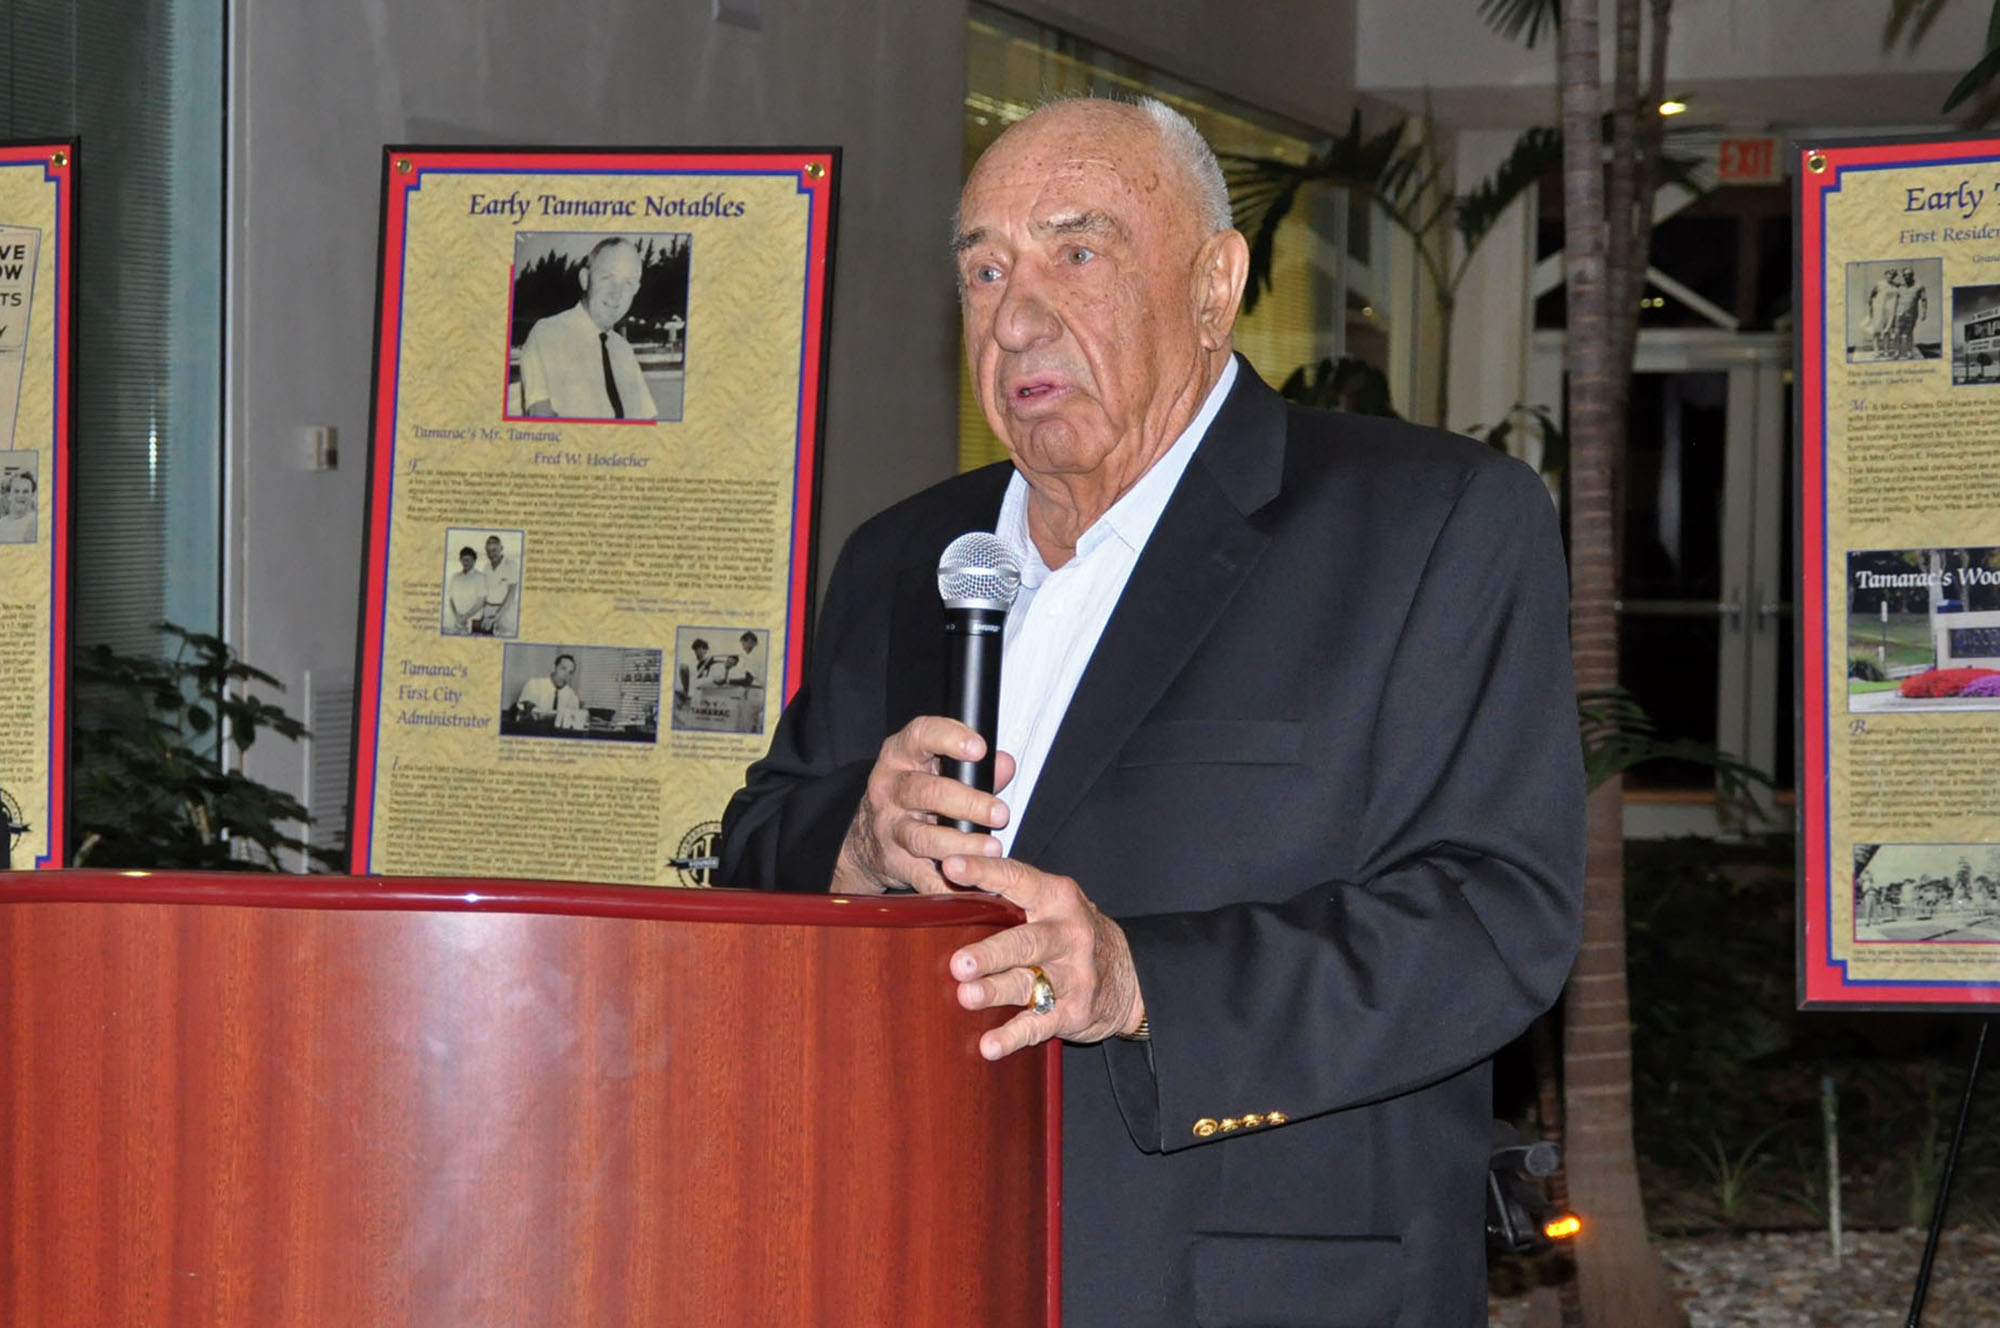 Kenneth Behring during Tamarac's 50th Anniversary celebration in 2012. - Photo by Sharon Aron Baron